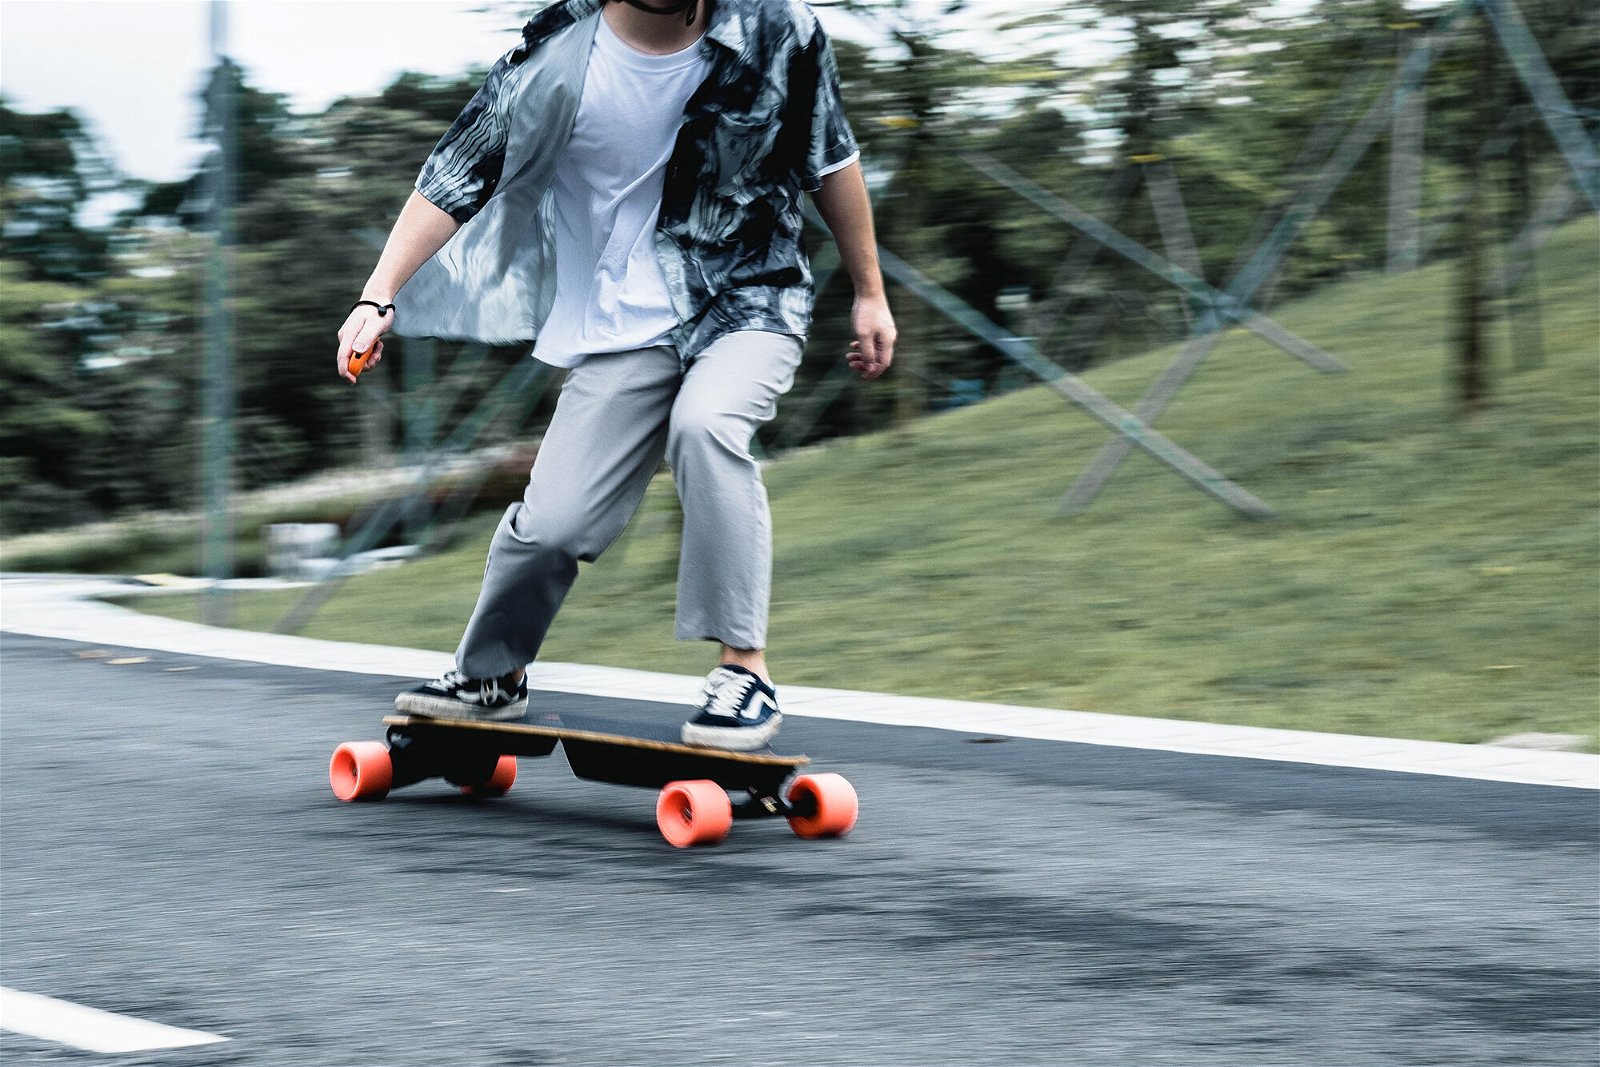 The Meepo Voyager is here.